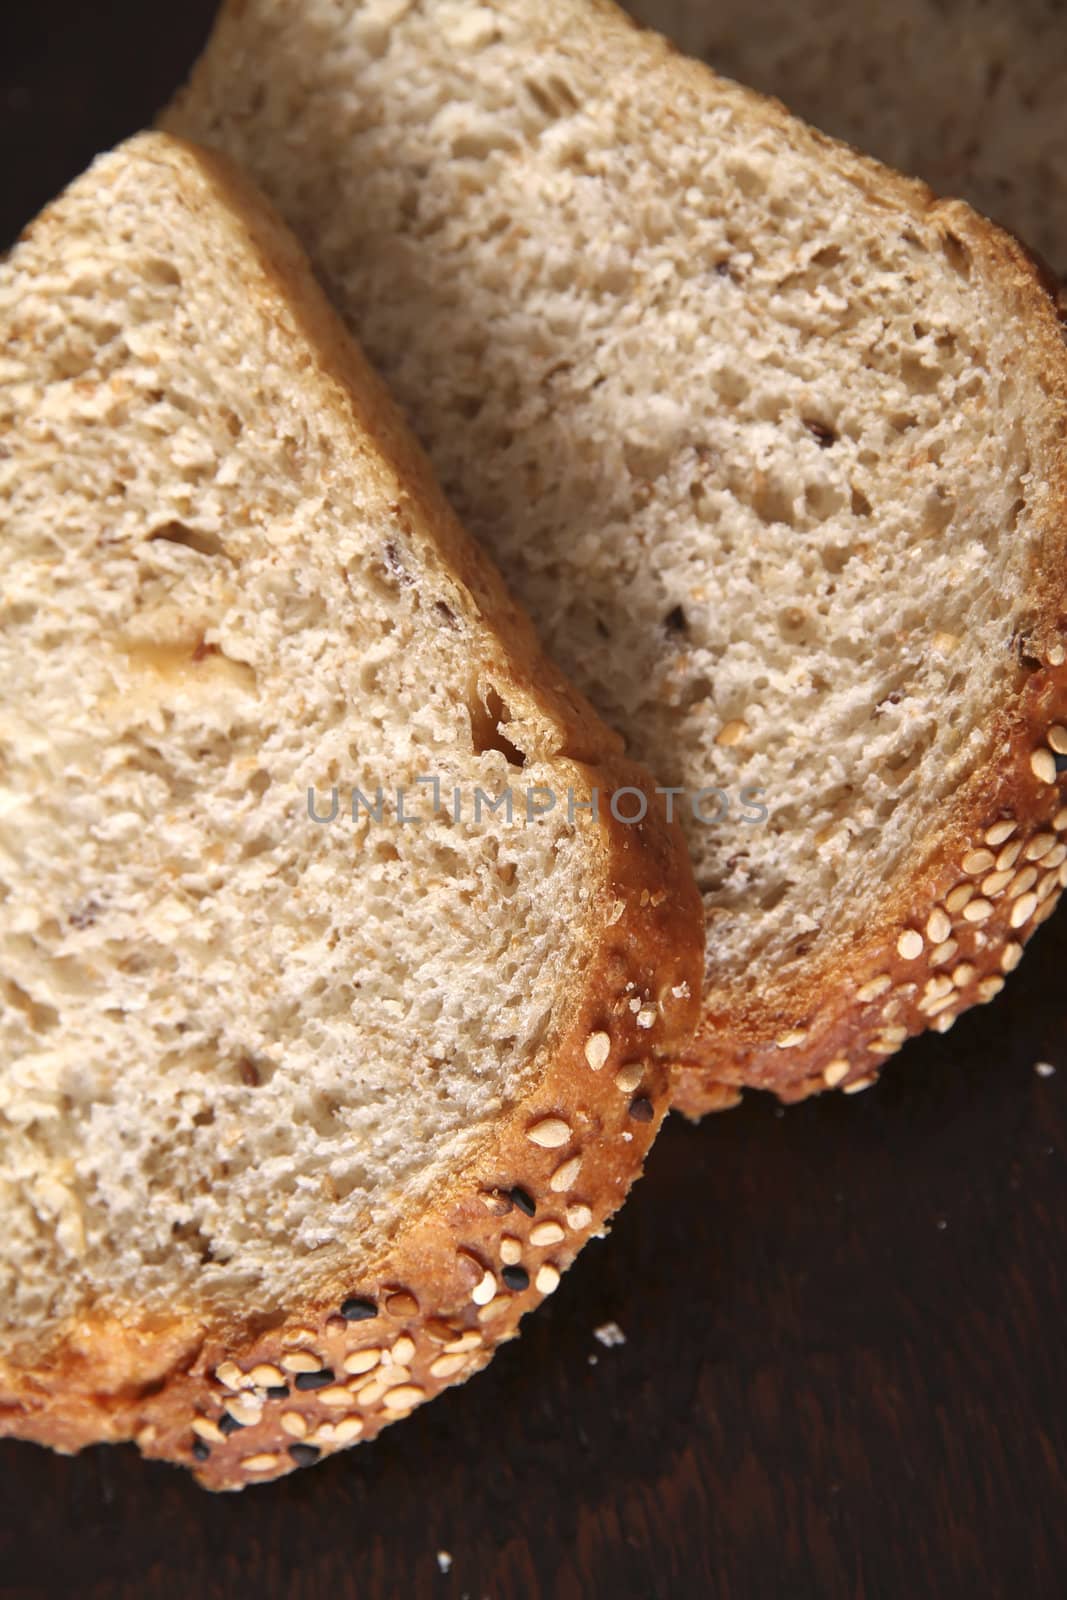 Slices of bread by Spectral